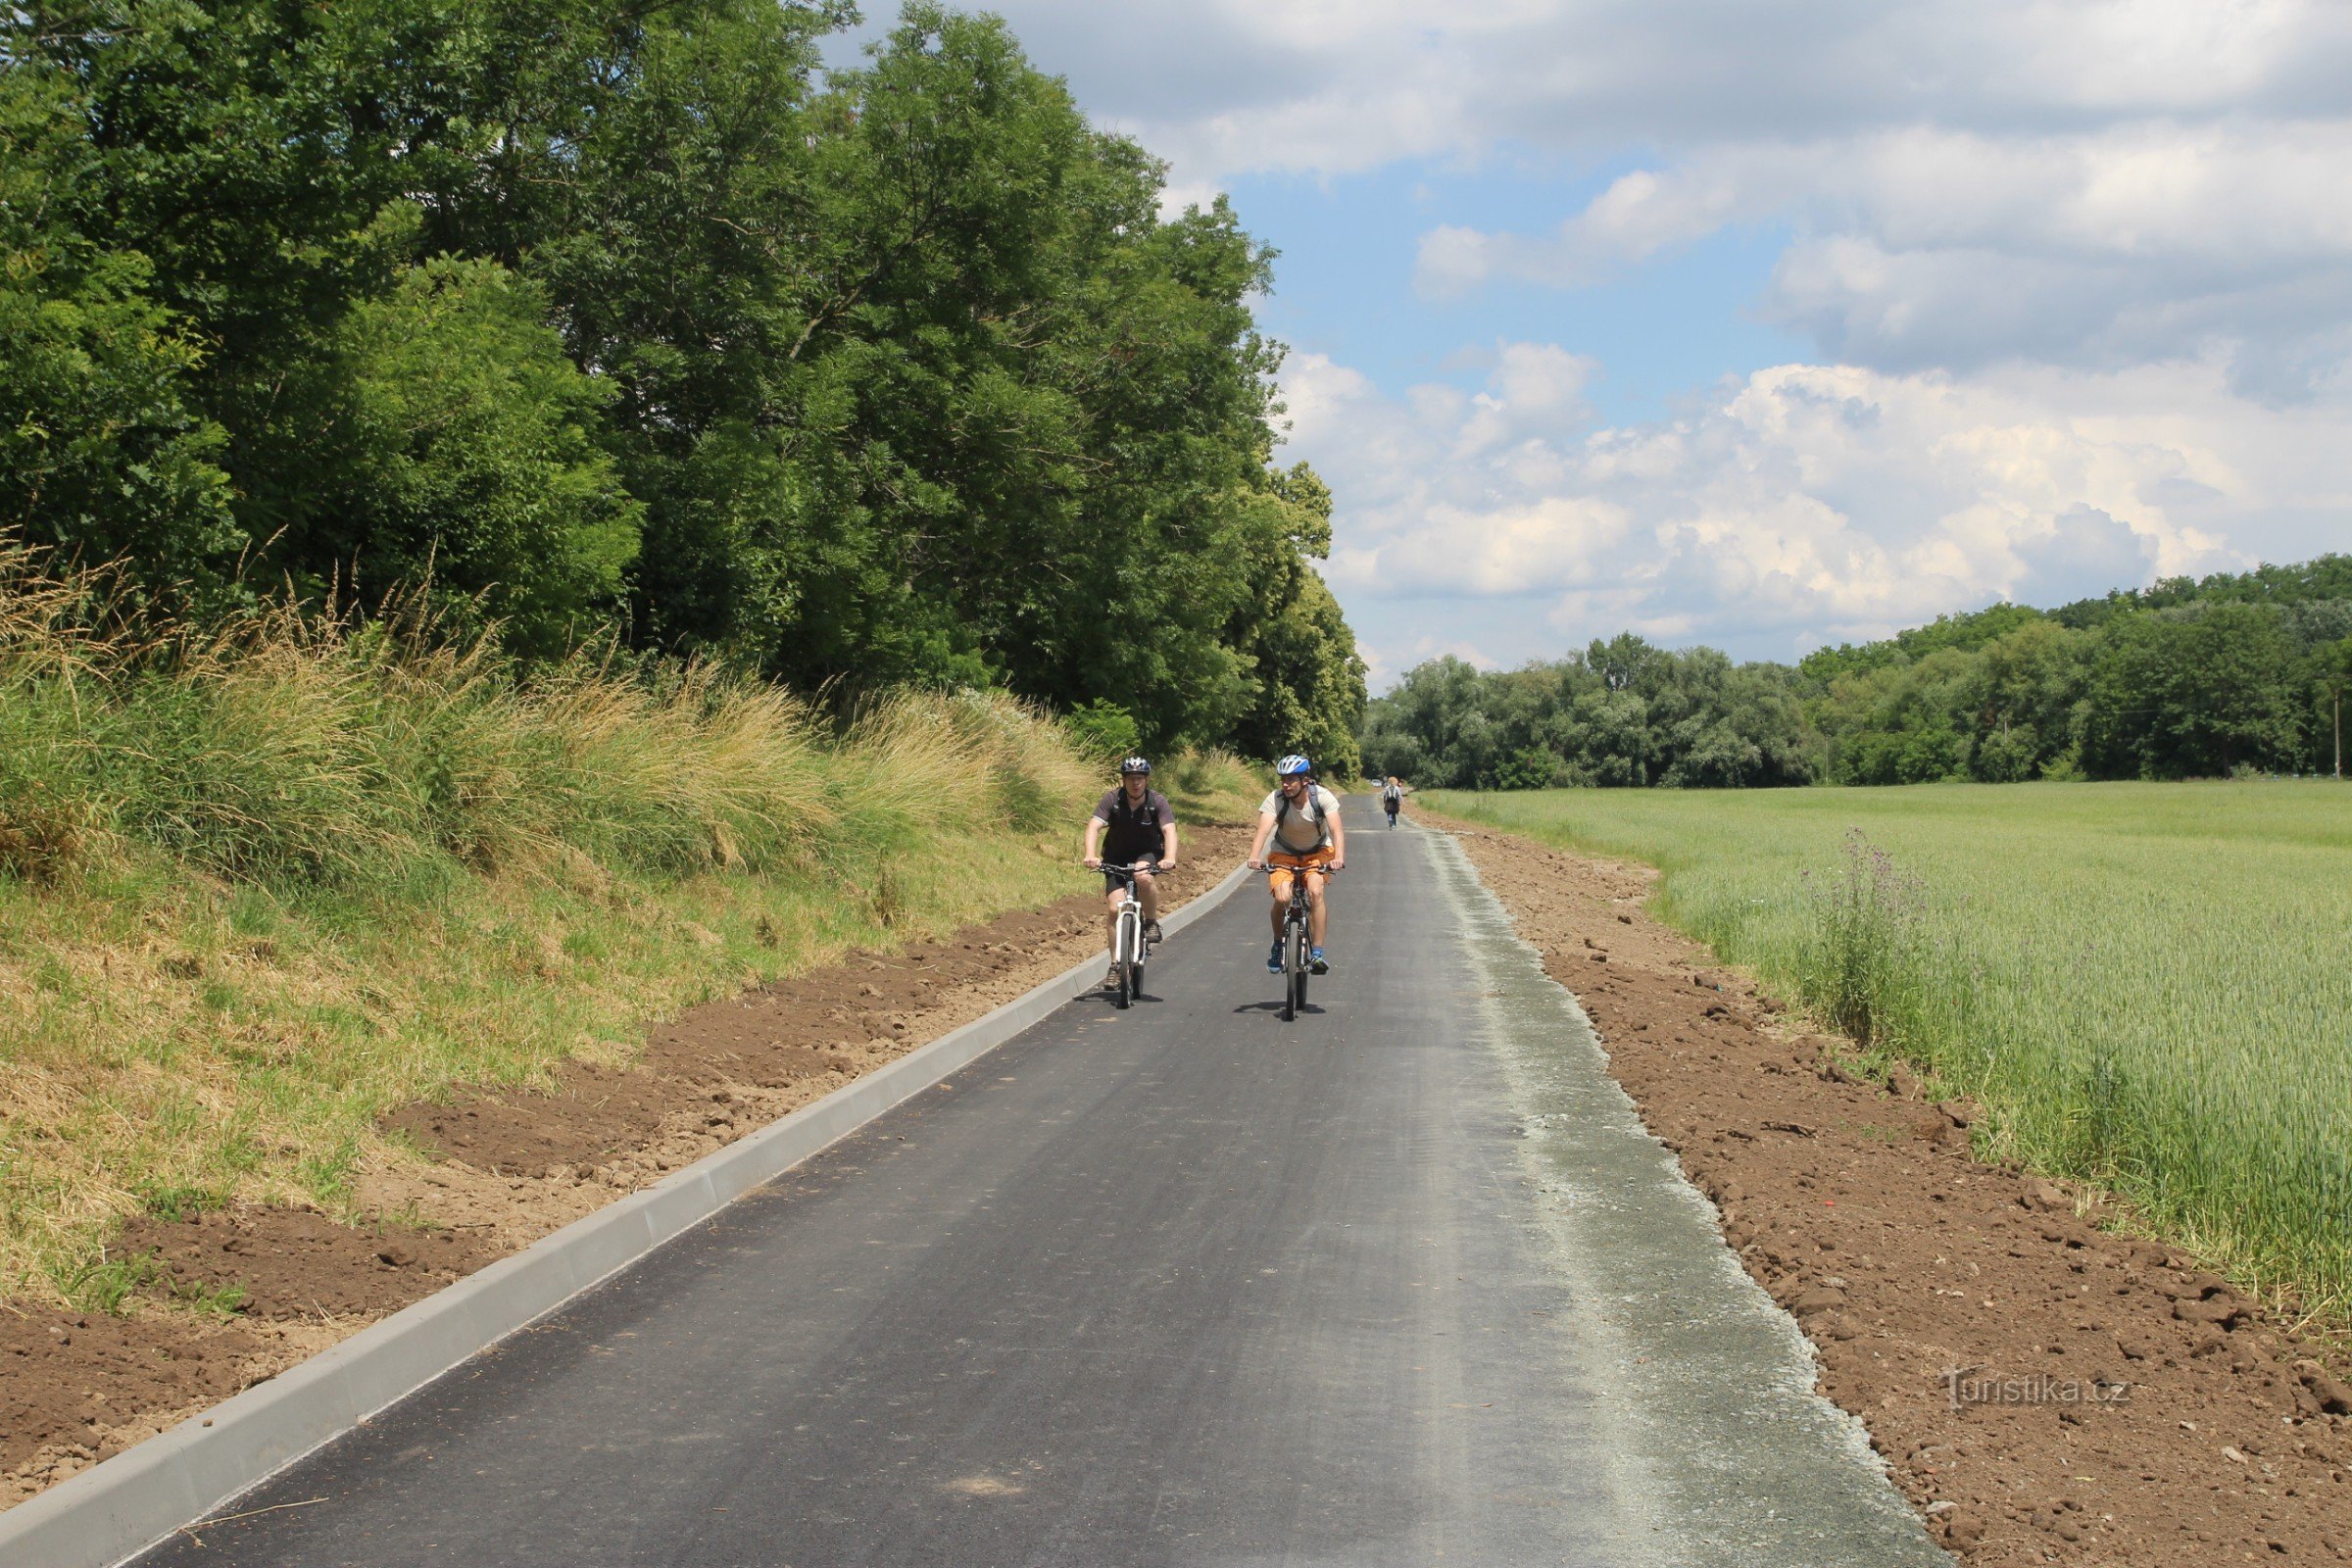 The new cycle path runs under the side embankment of the Svratka river